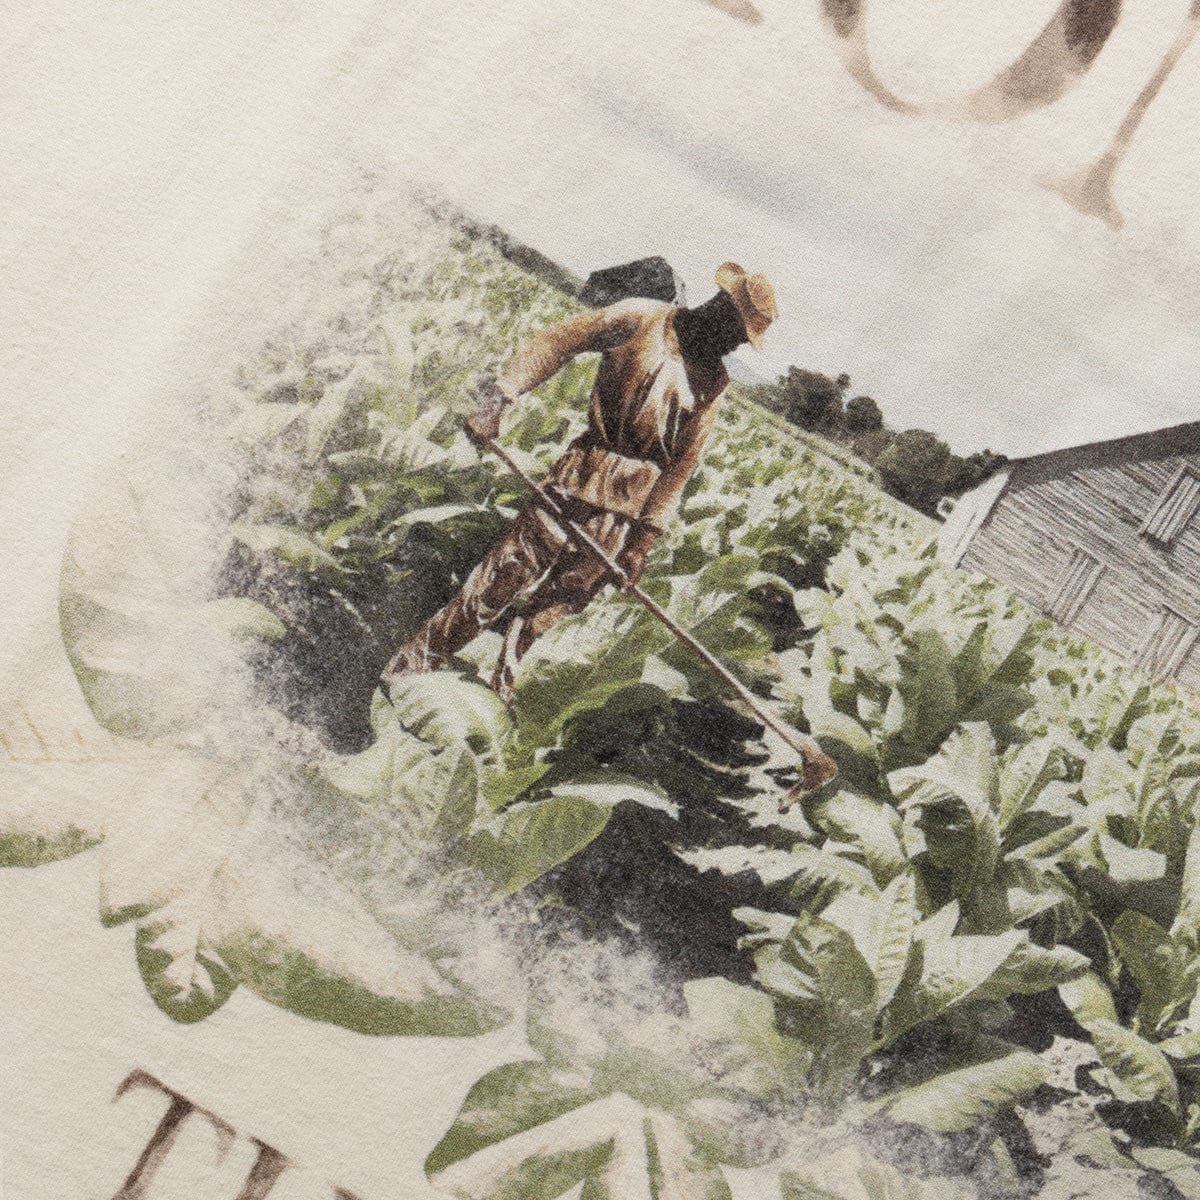 Honor The Gift T-Shirts TOBACCO FIELD T-SHIRT